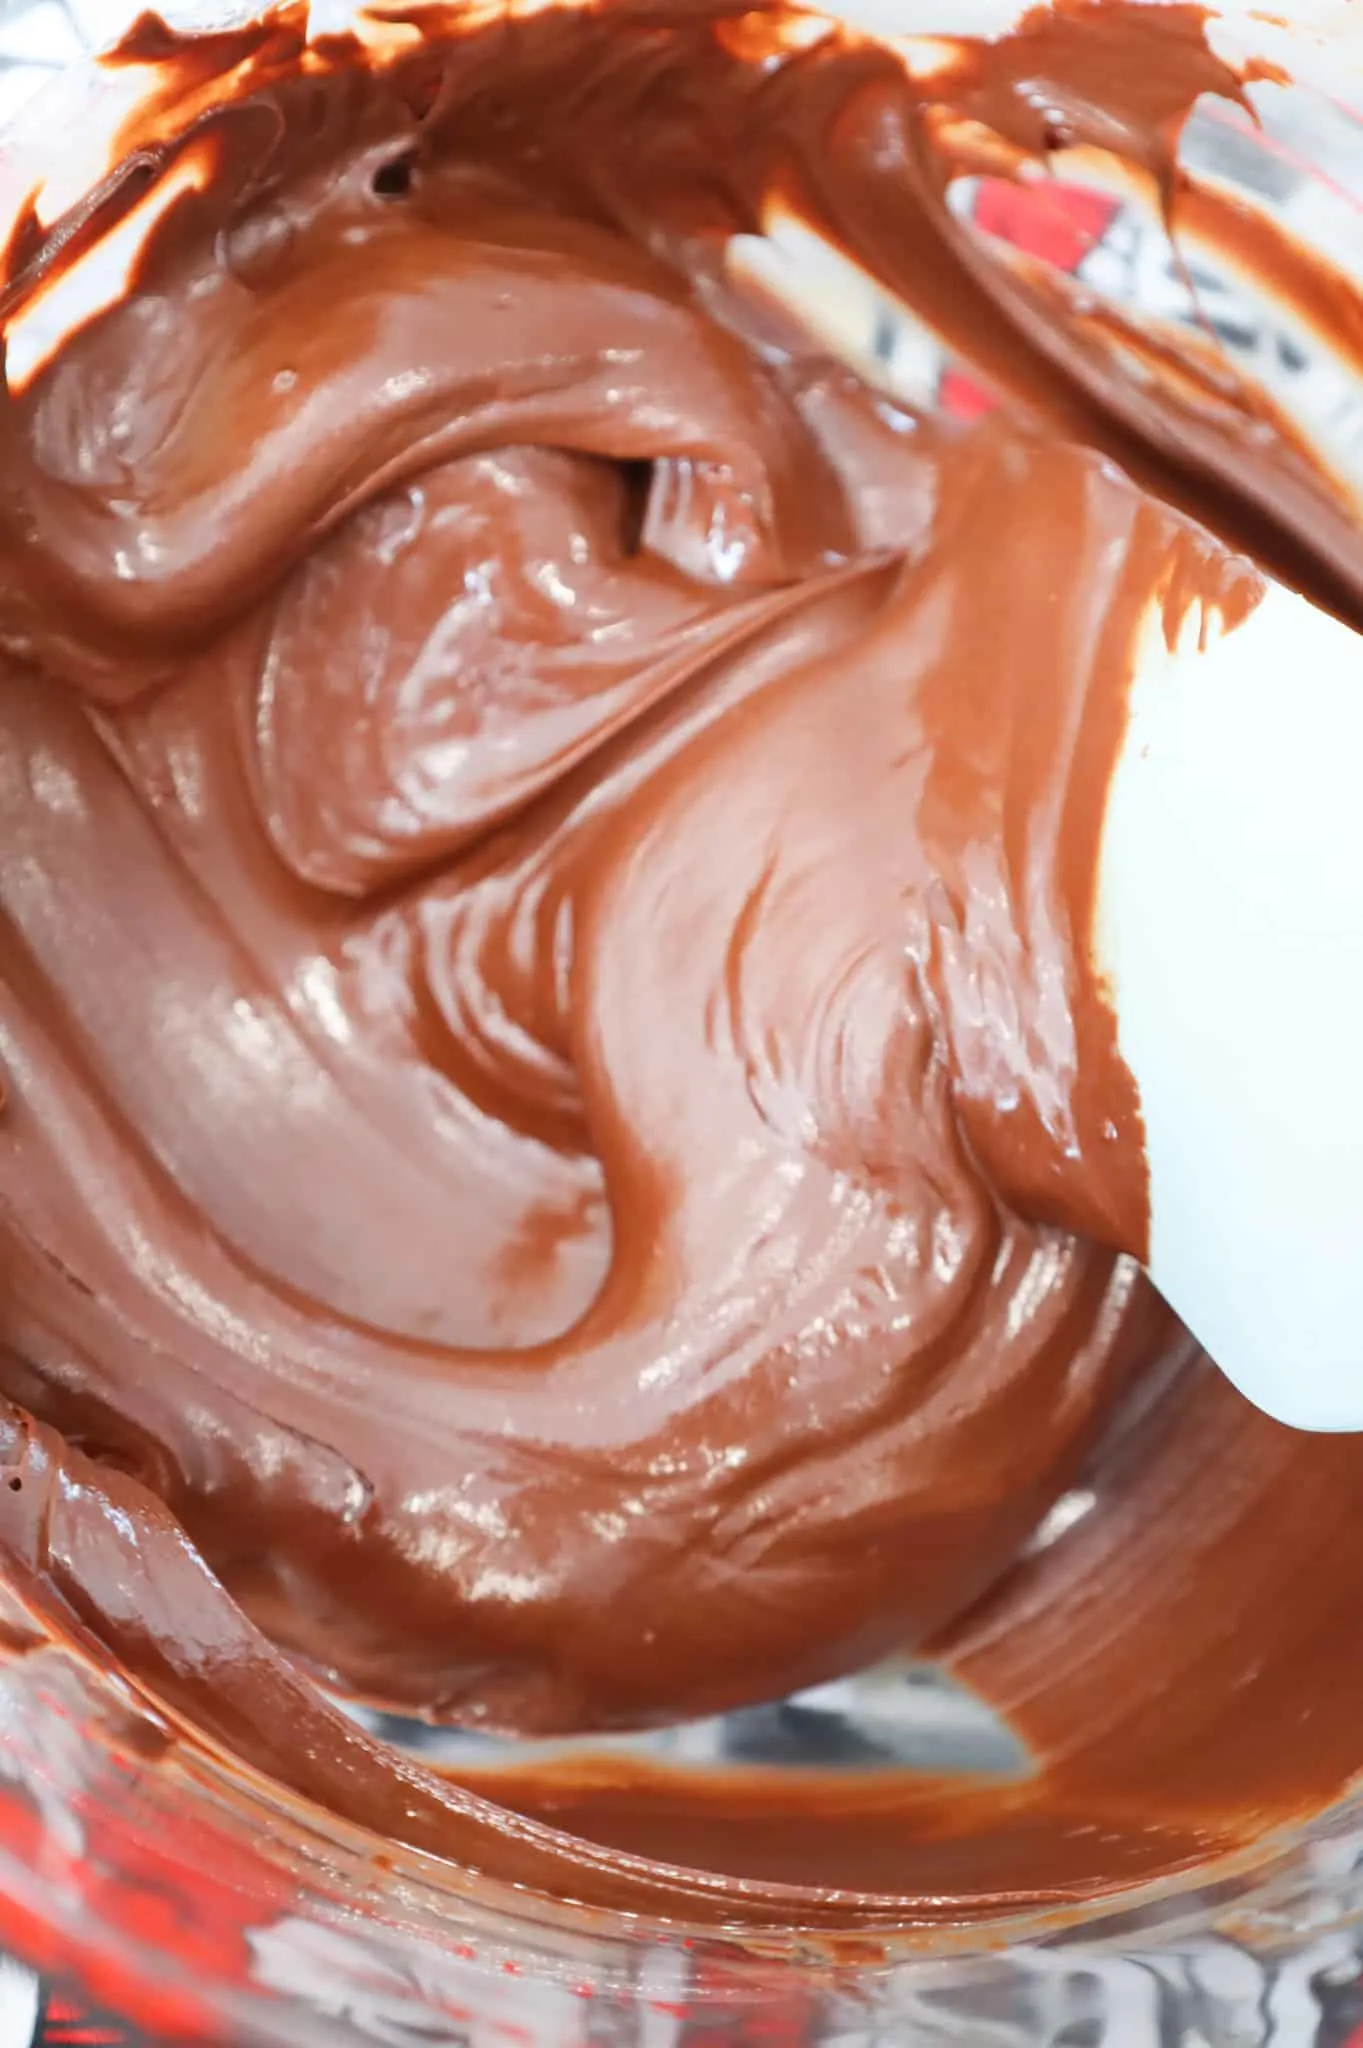 melted chocolate mixture in a bowl